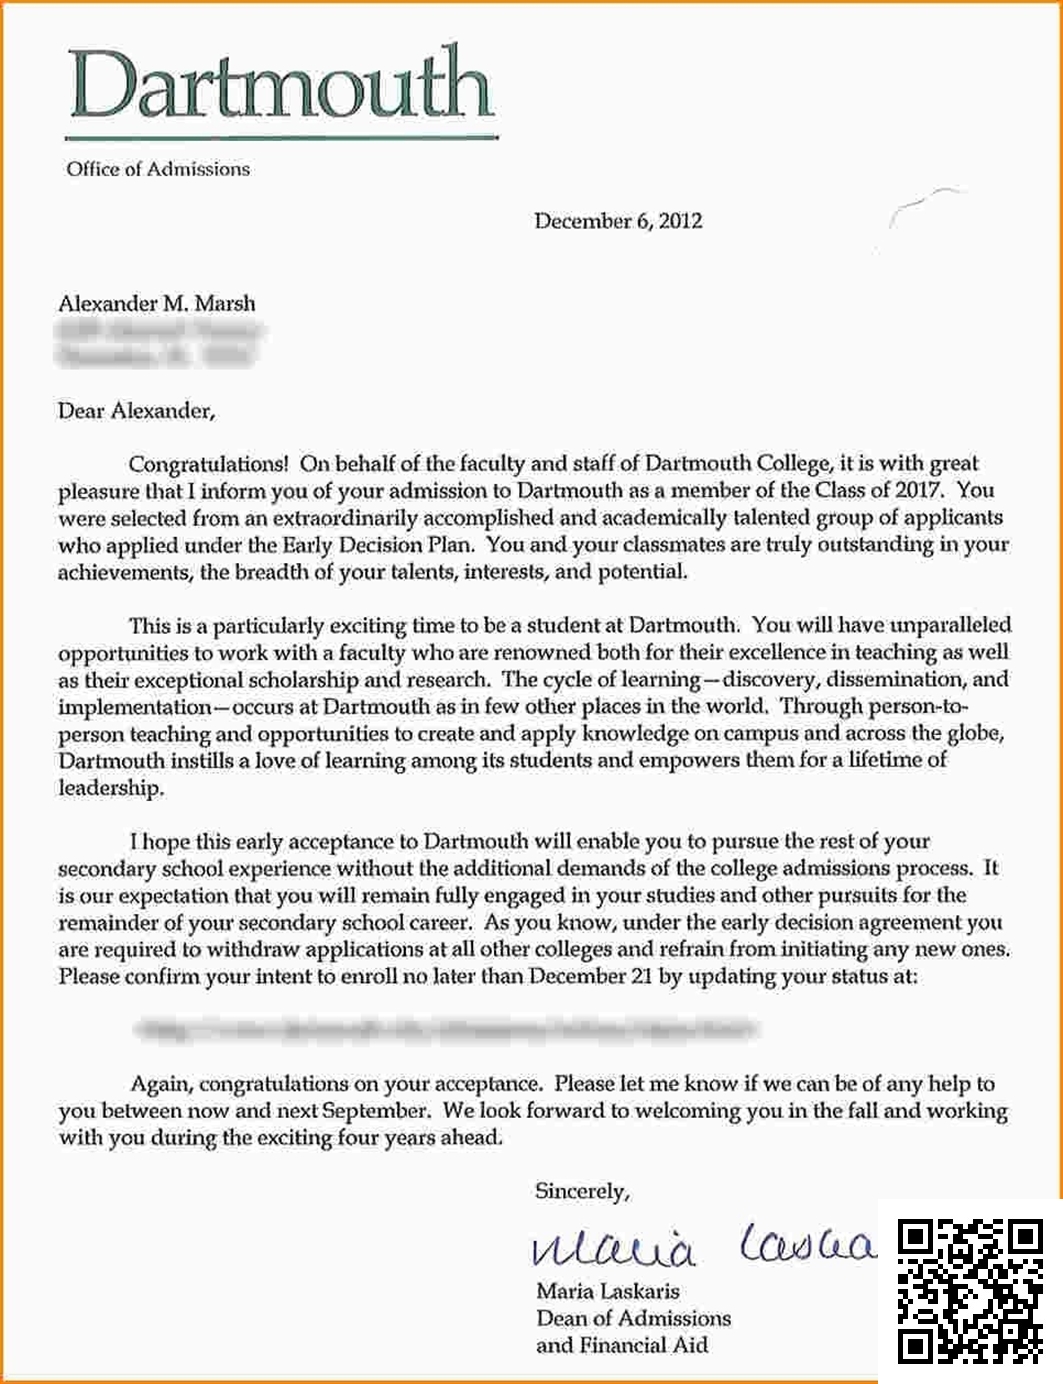 College Application Letter Templates - 13+ Free Word, PDF ...